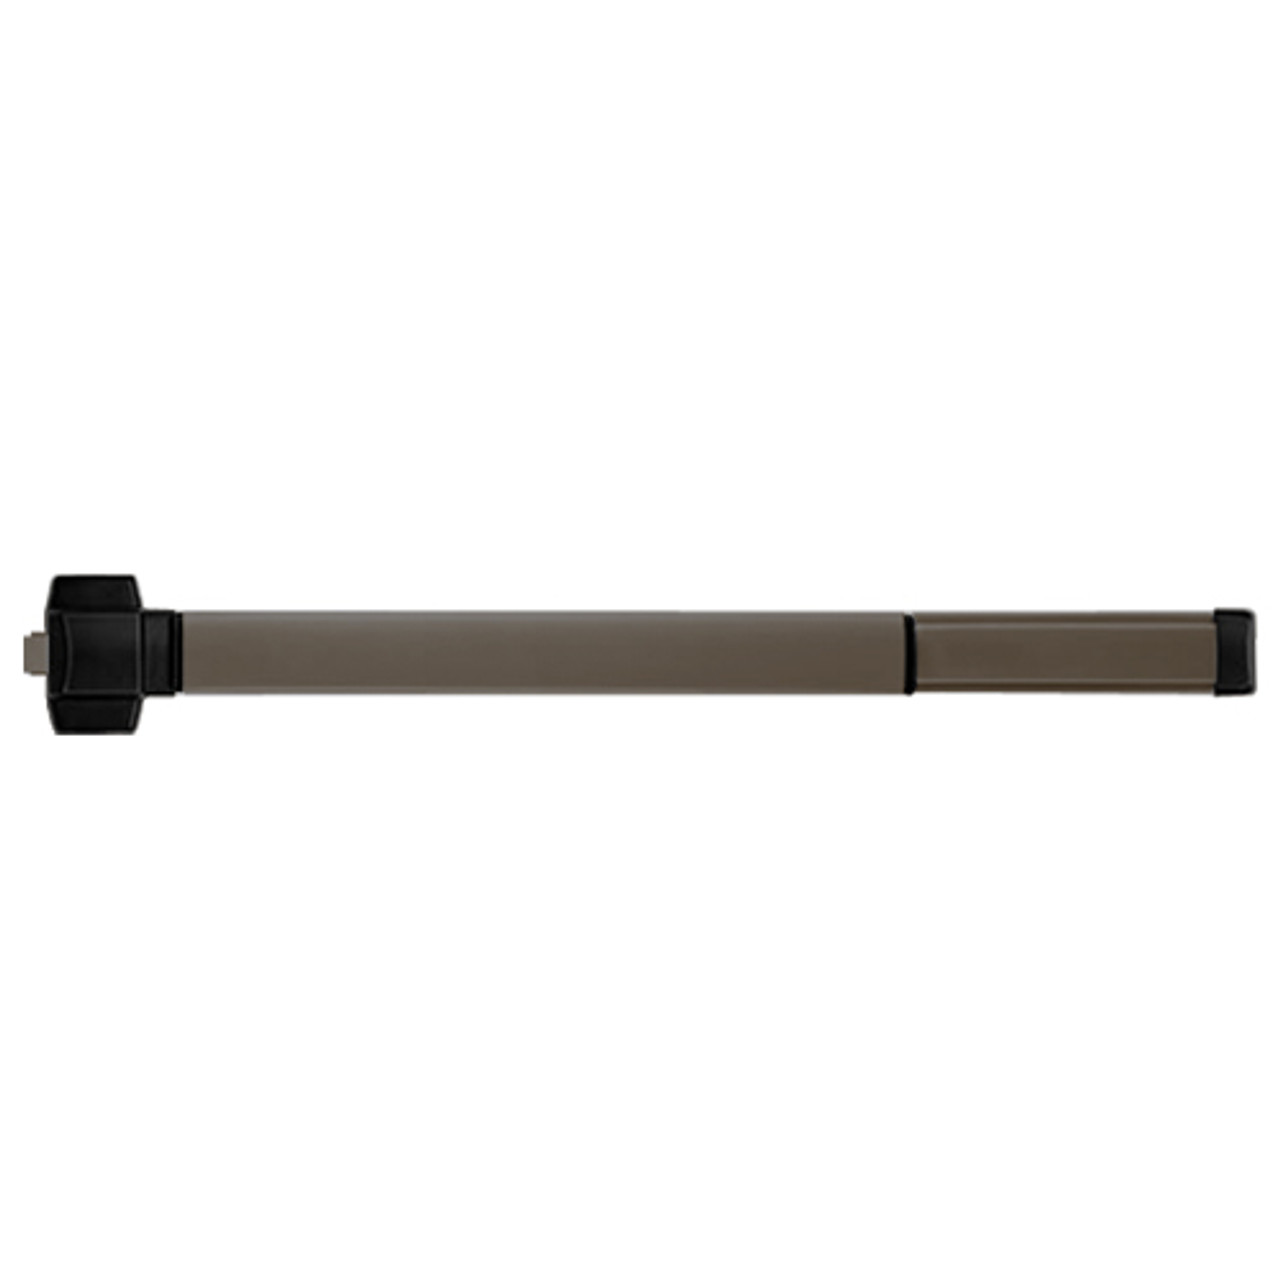 TSFL5114-695-48 PHI 5000 Series Fire Rated Reliant Rim Exit Device Prepped for Lever Always Active with Touchbar Monitoring Switch in Dark Bronze Powder Coat Finish